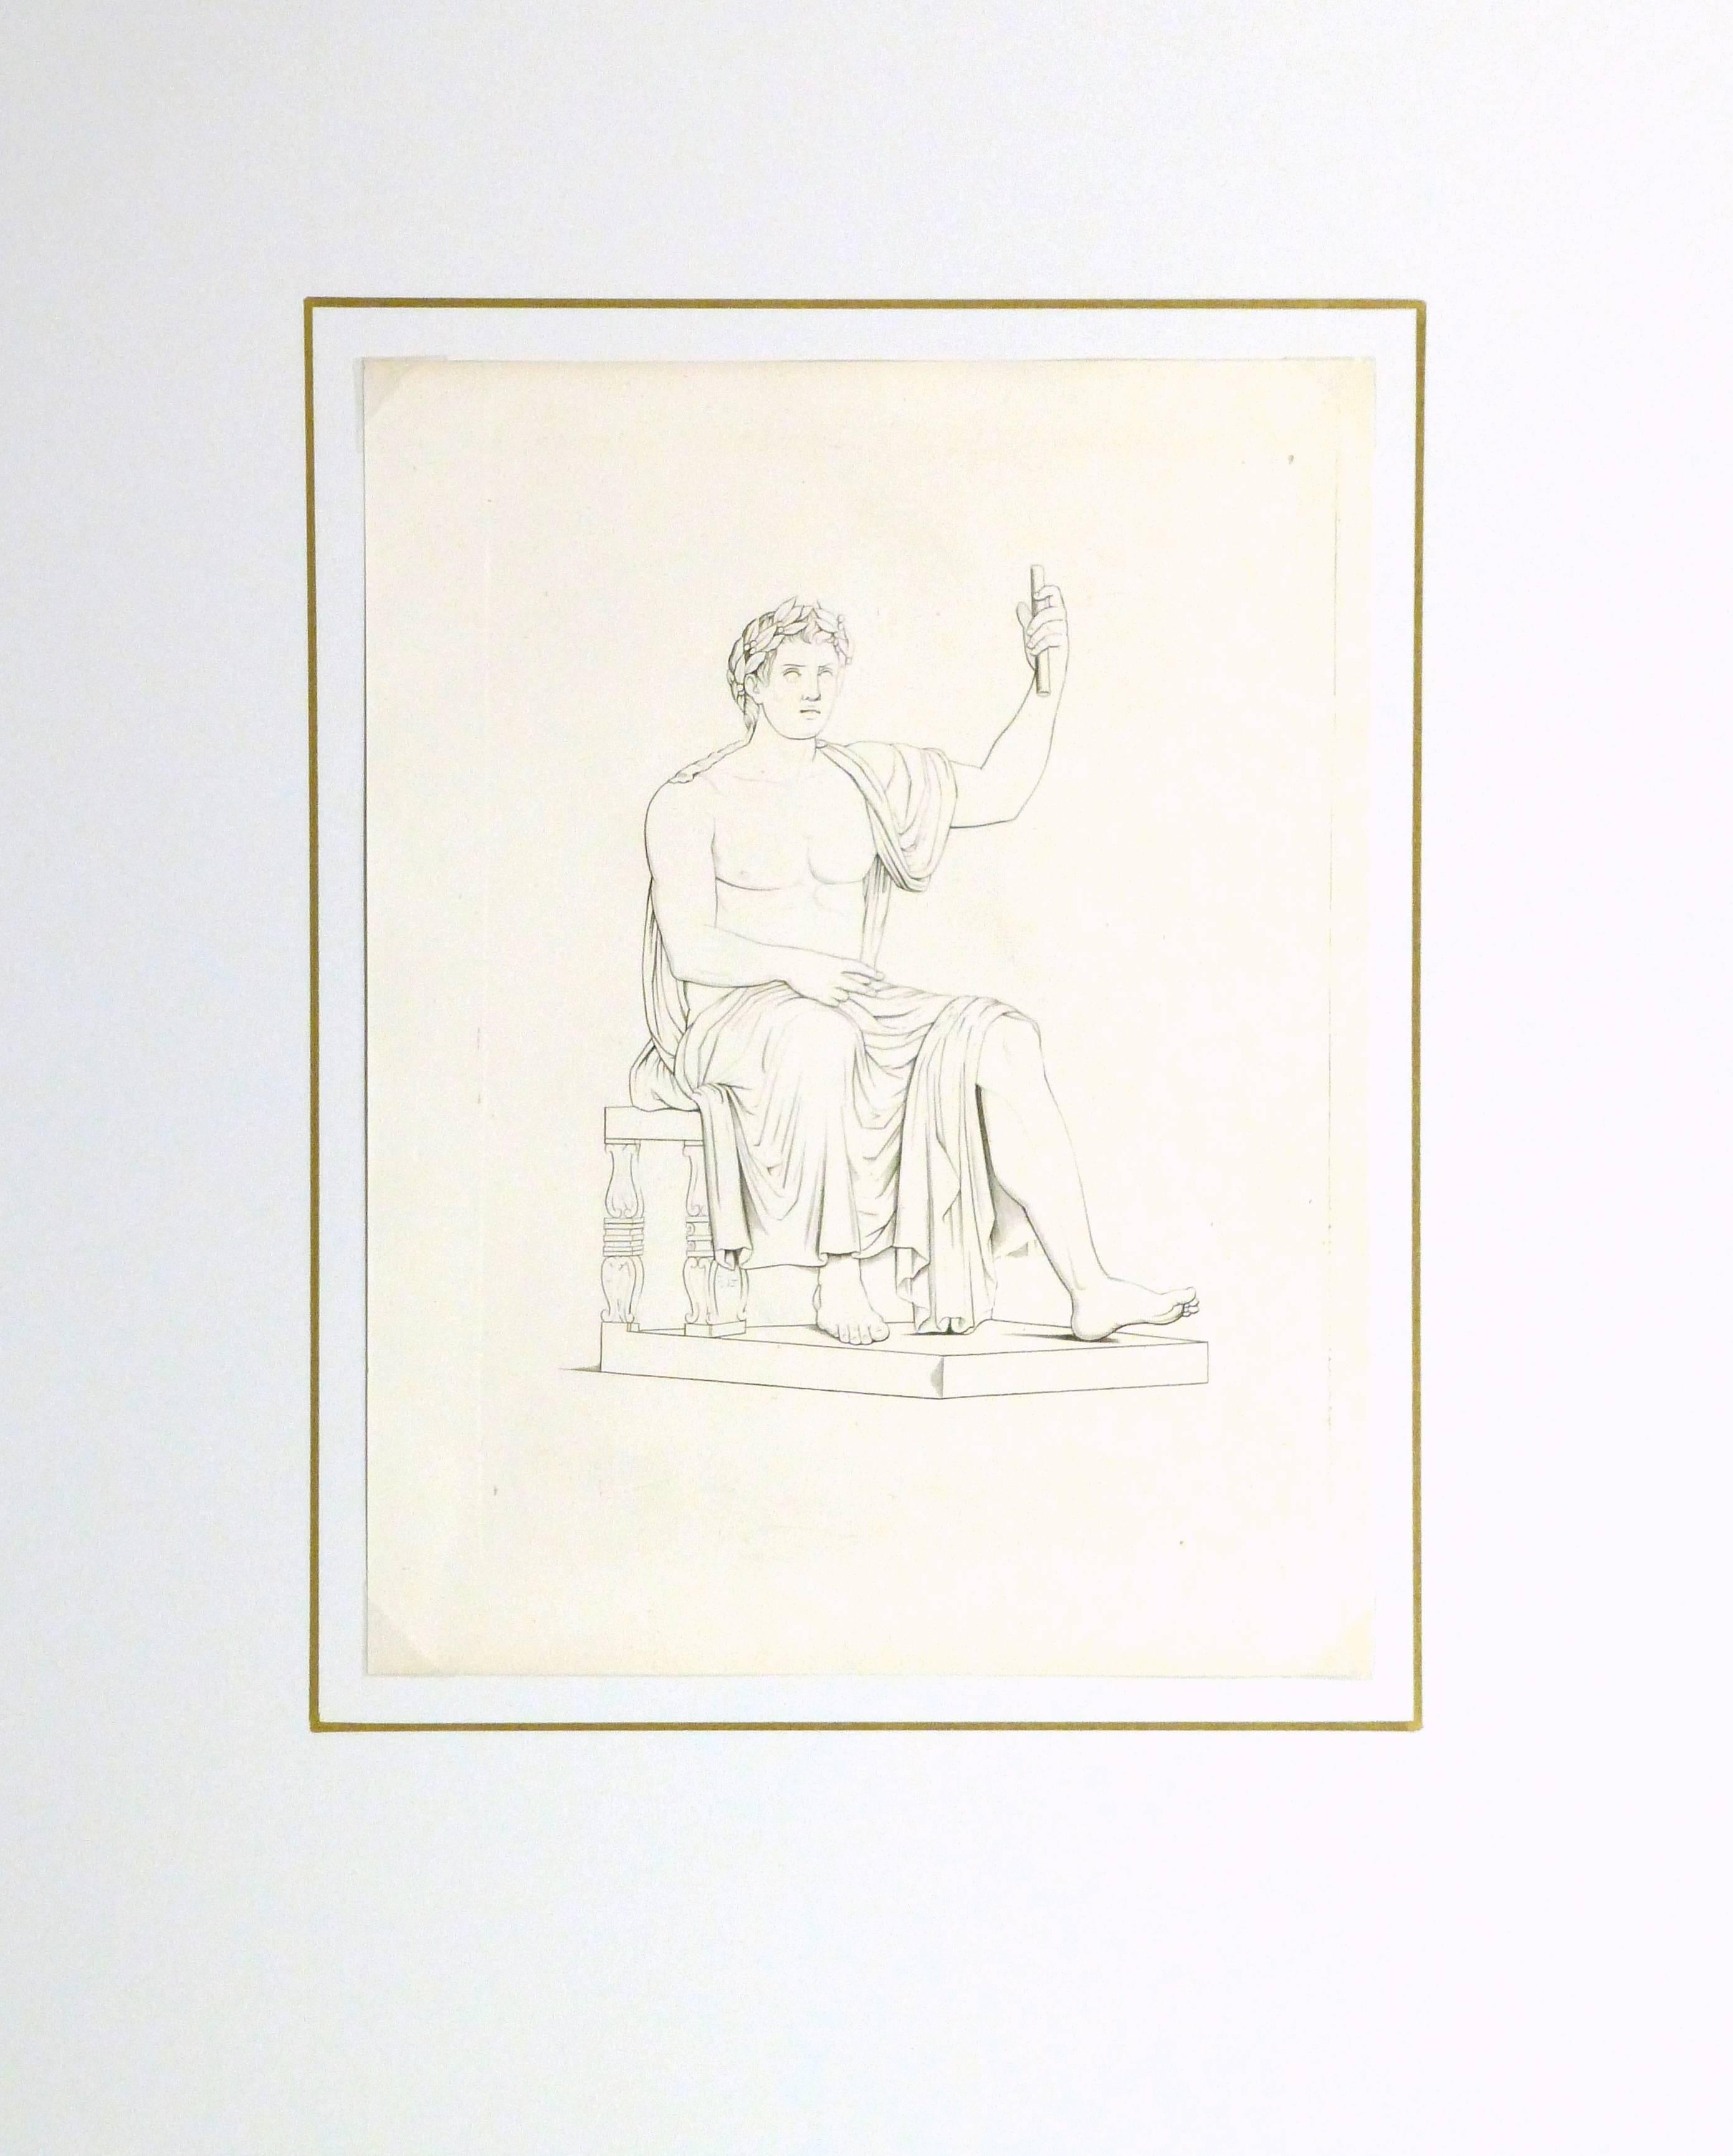 Fine antique copper line engraving of roman style male statue seated and clutching a scroll, circa 1850.

Original artwork on paper displayed on a white mat with a gold border. Archival plastic sleeve and Certificate of Authenticity included.